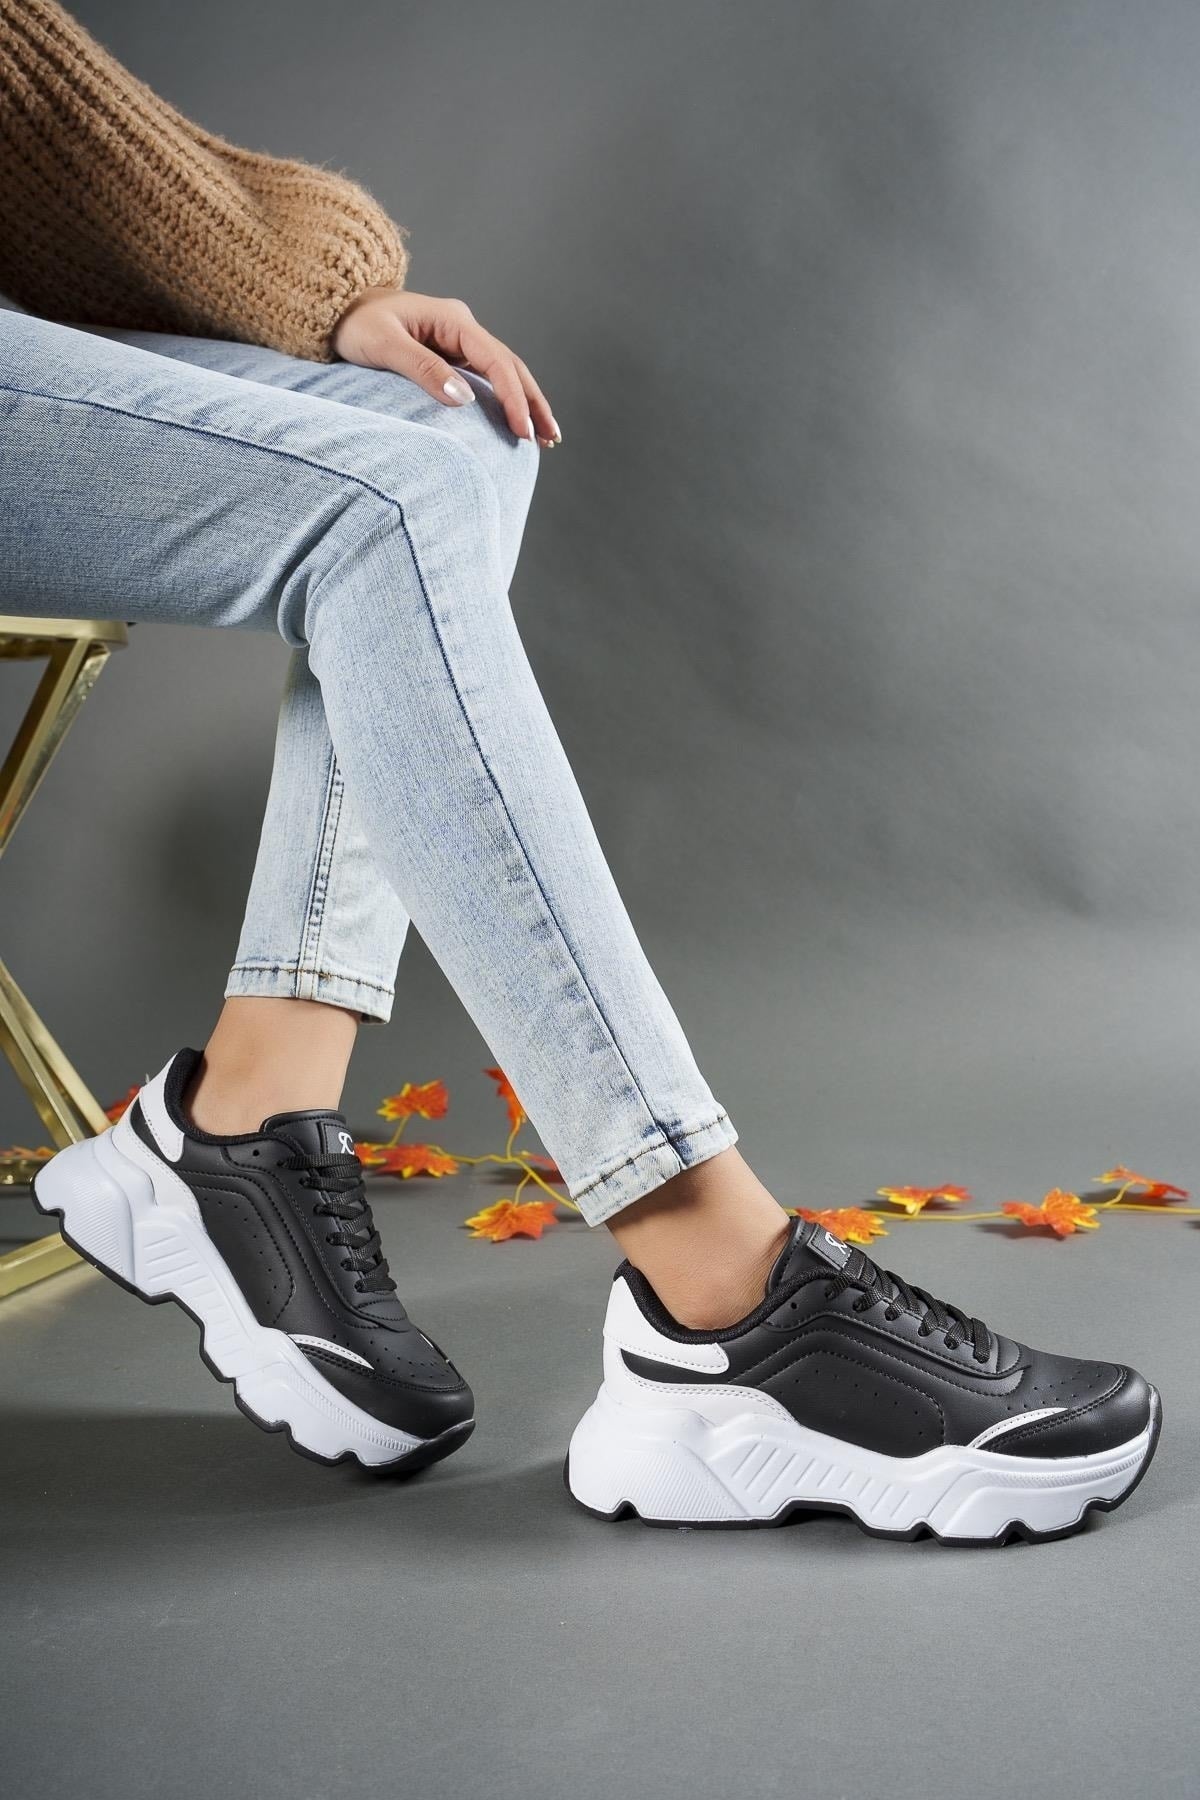 Woman sneaker 0012146 black and white